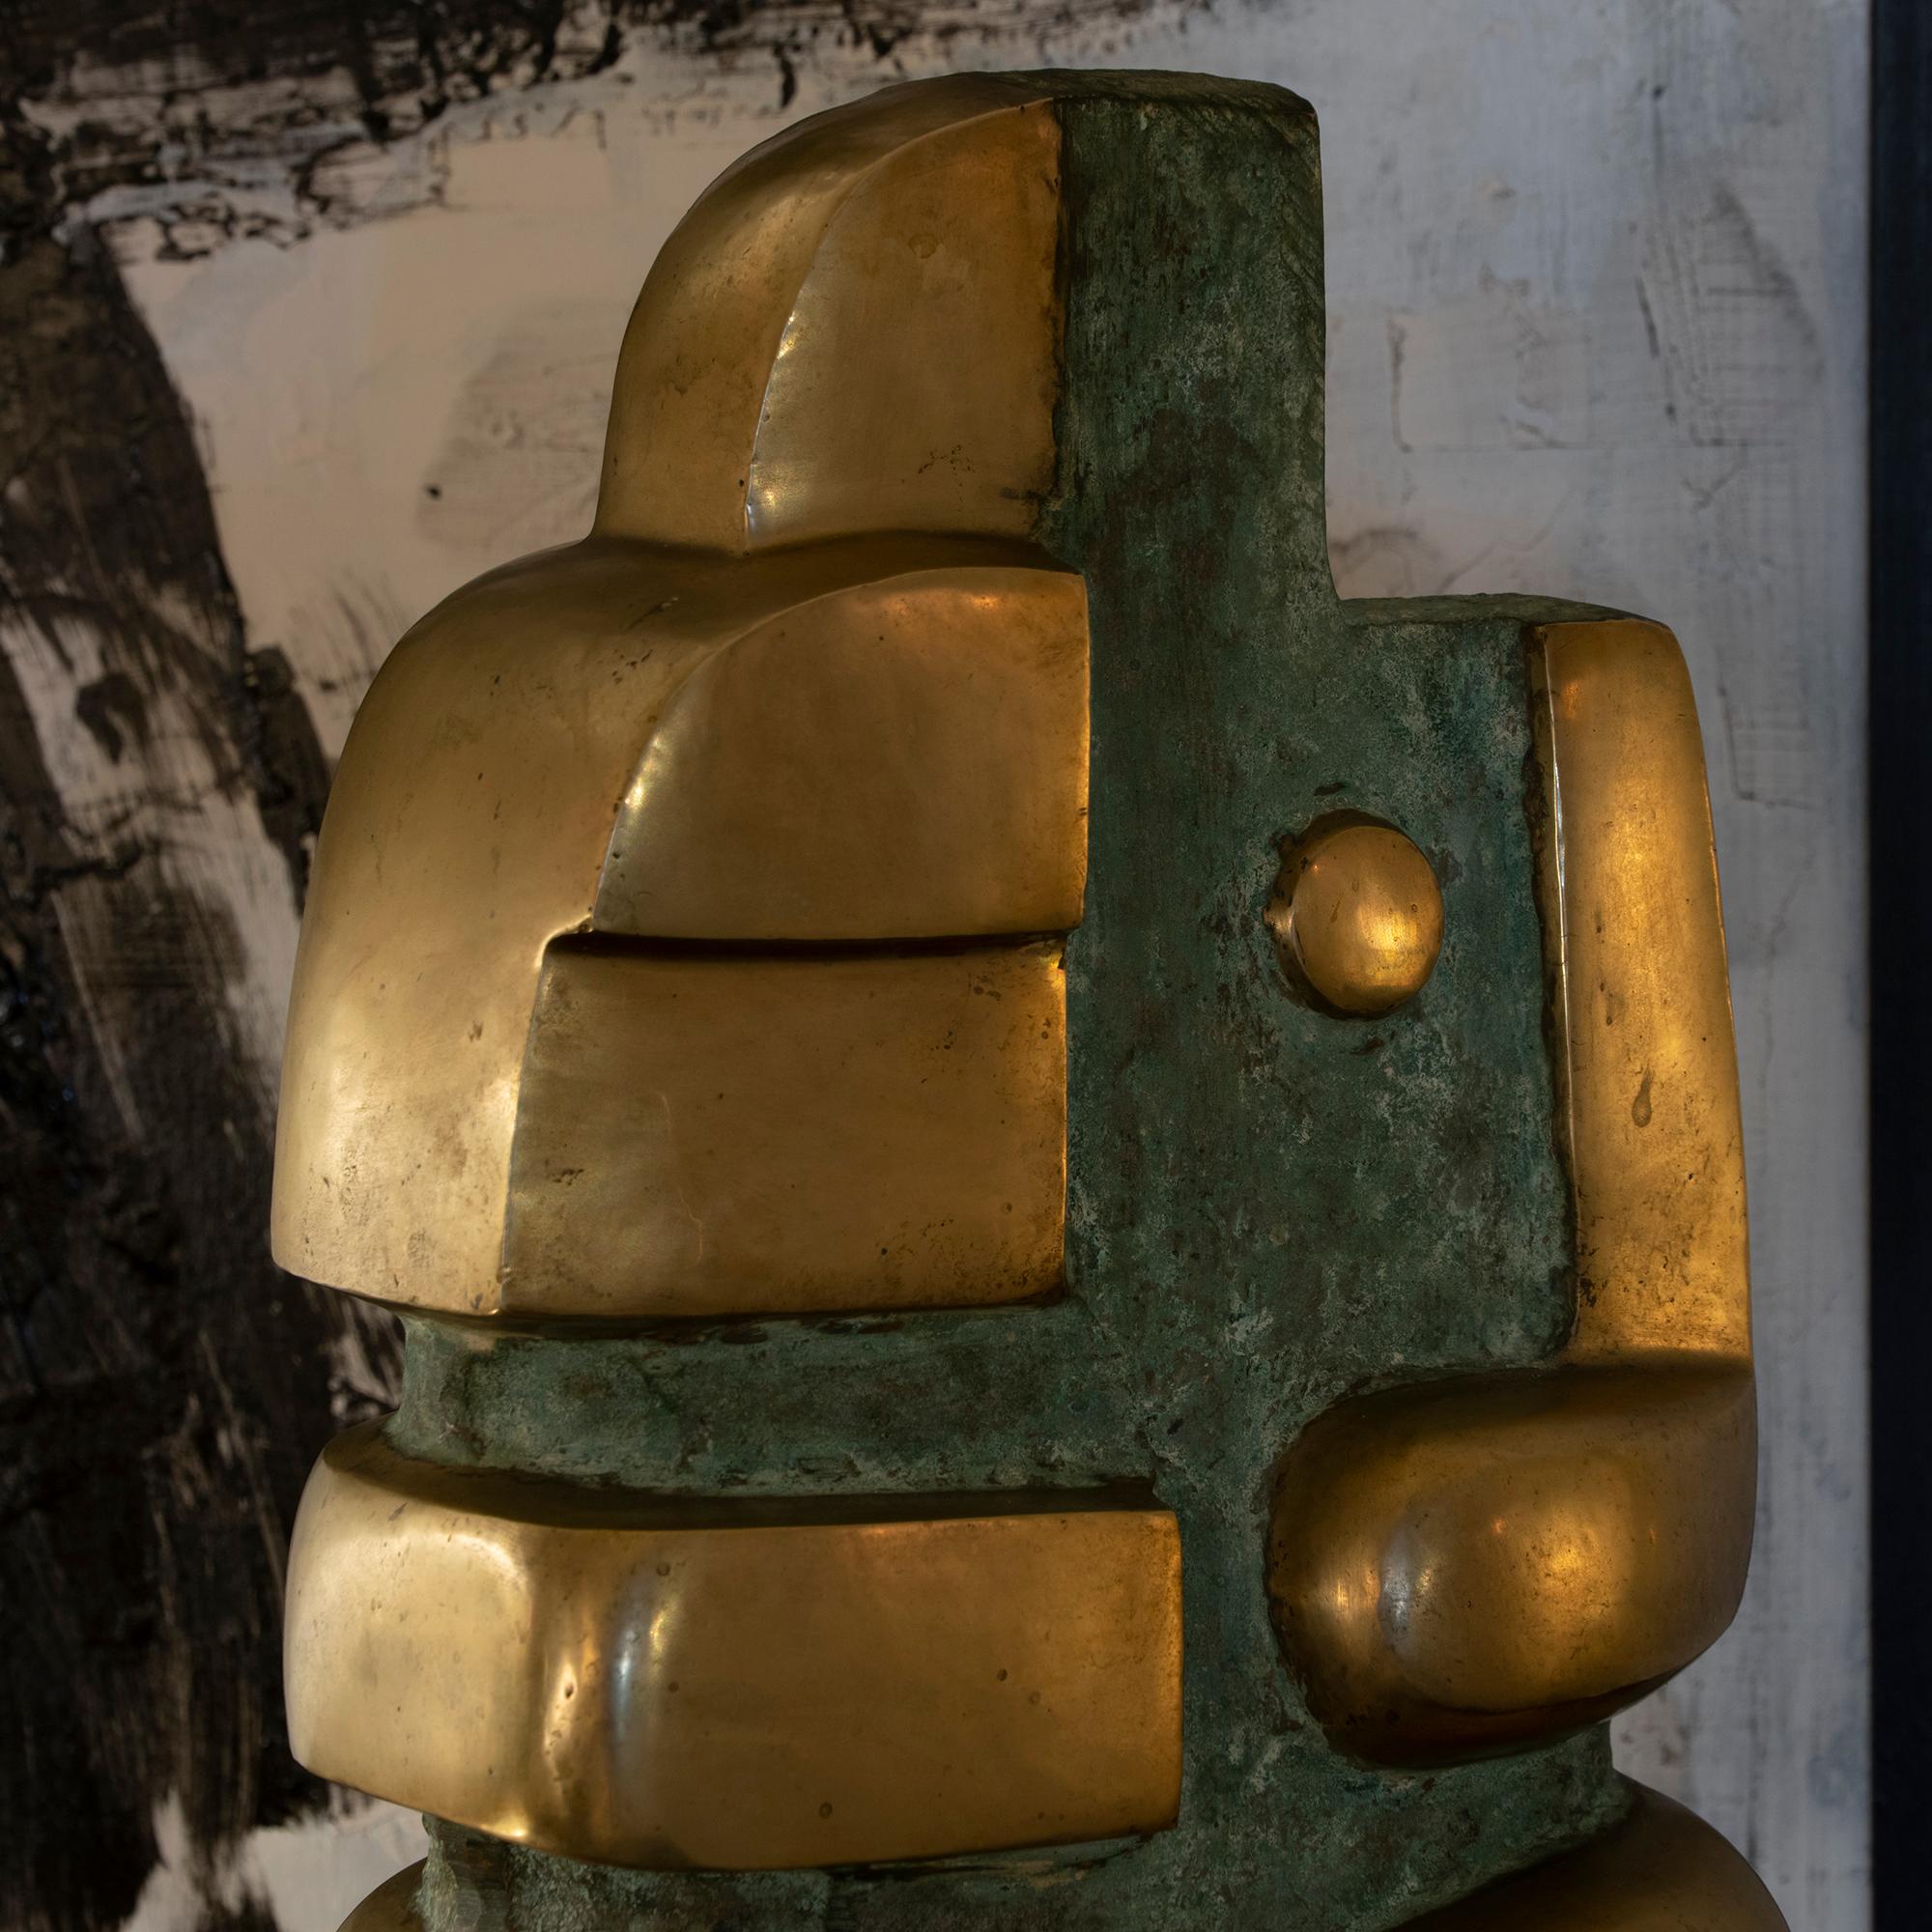 Polished Bronze Abstract Sculpture, Signed and Dated Pita Zaire 89 1